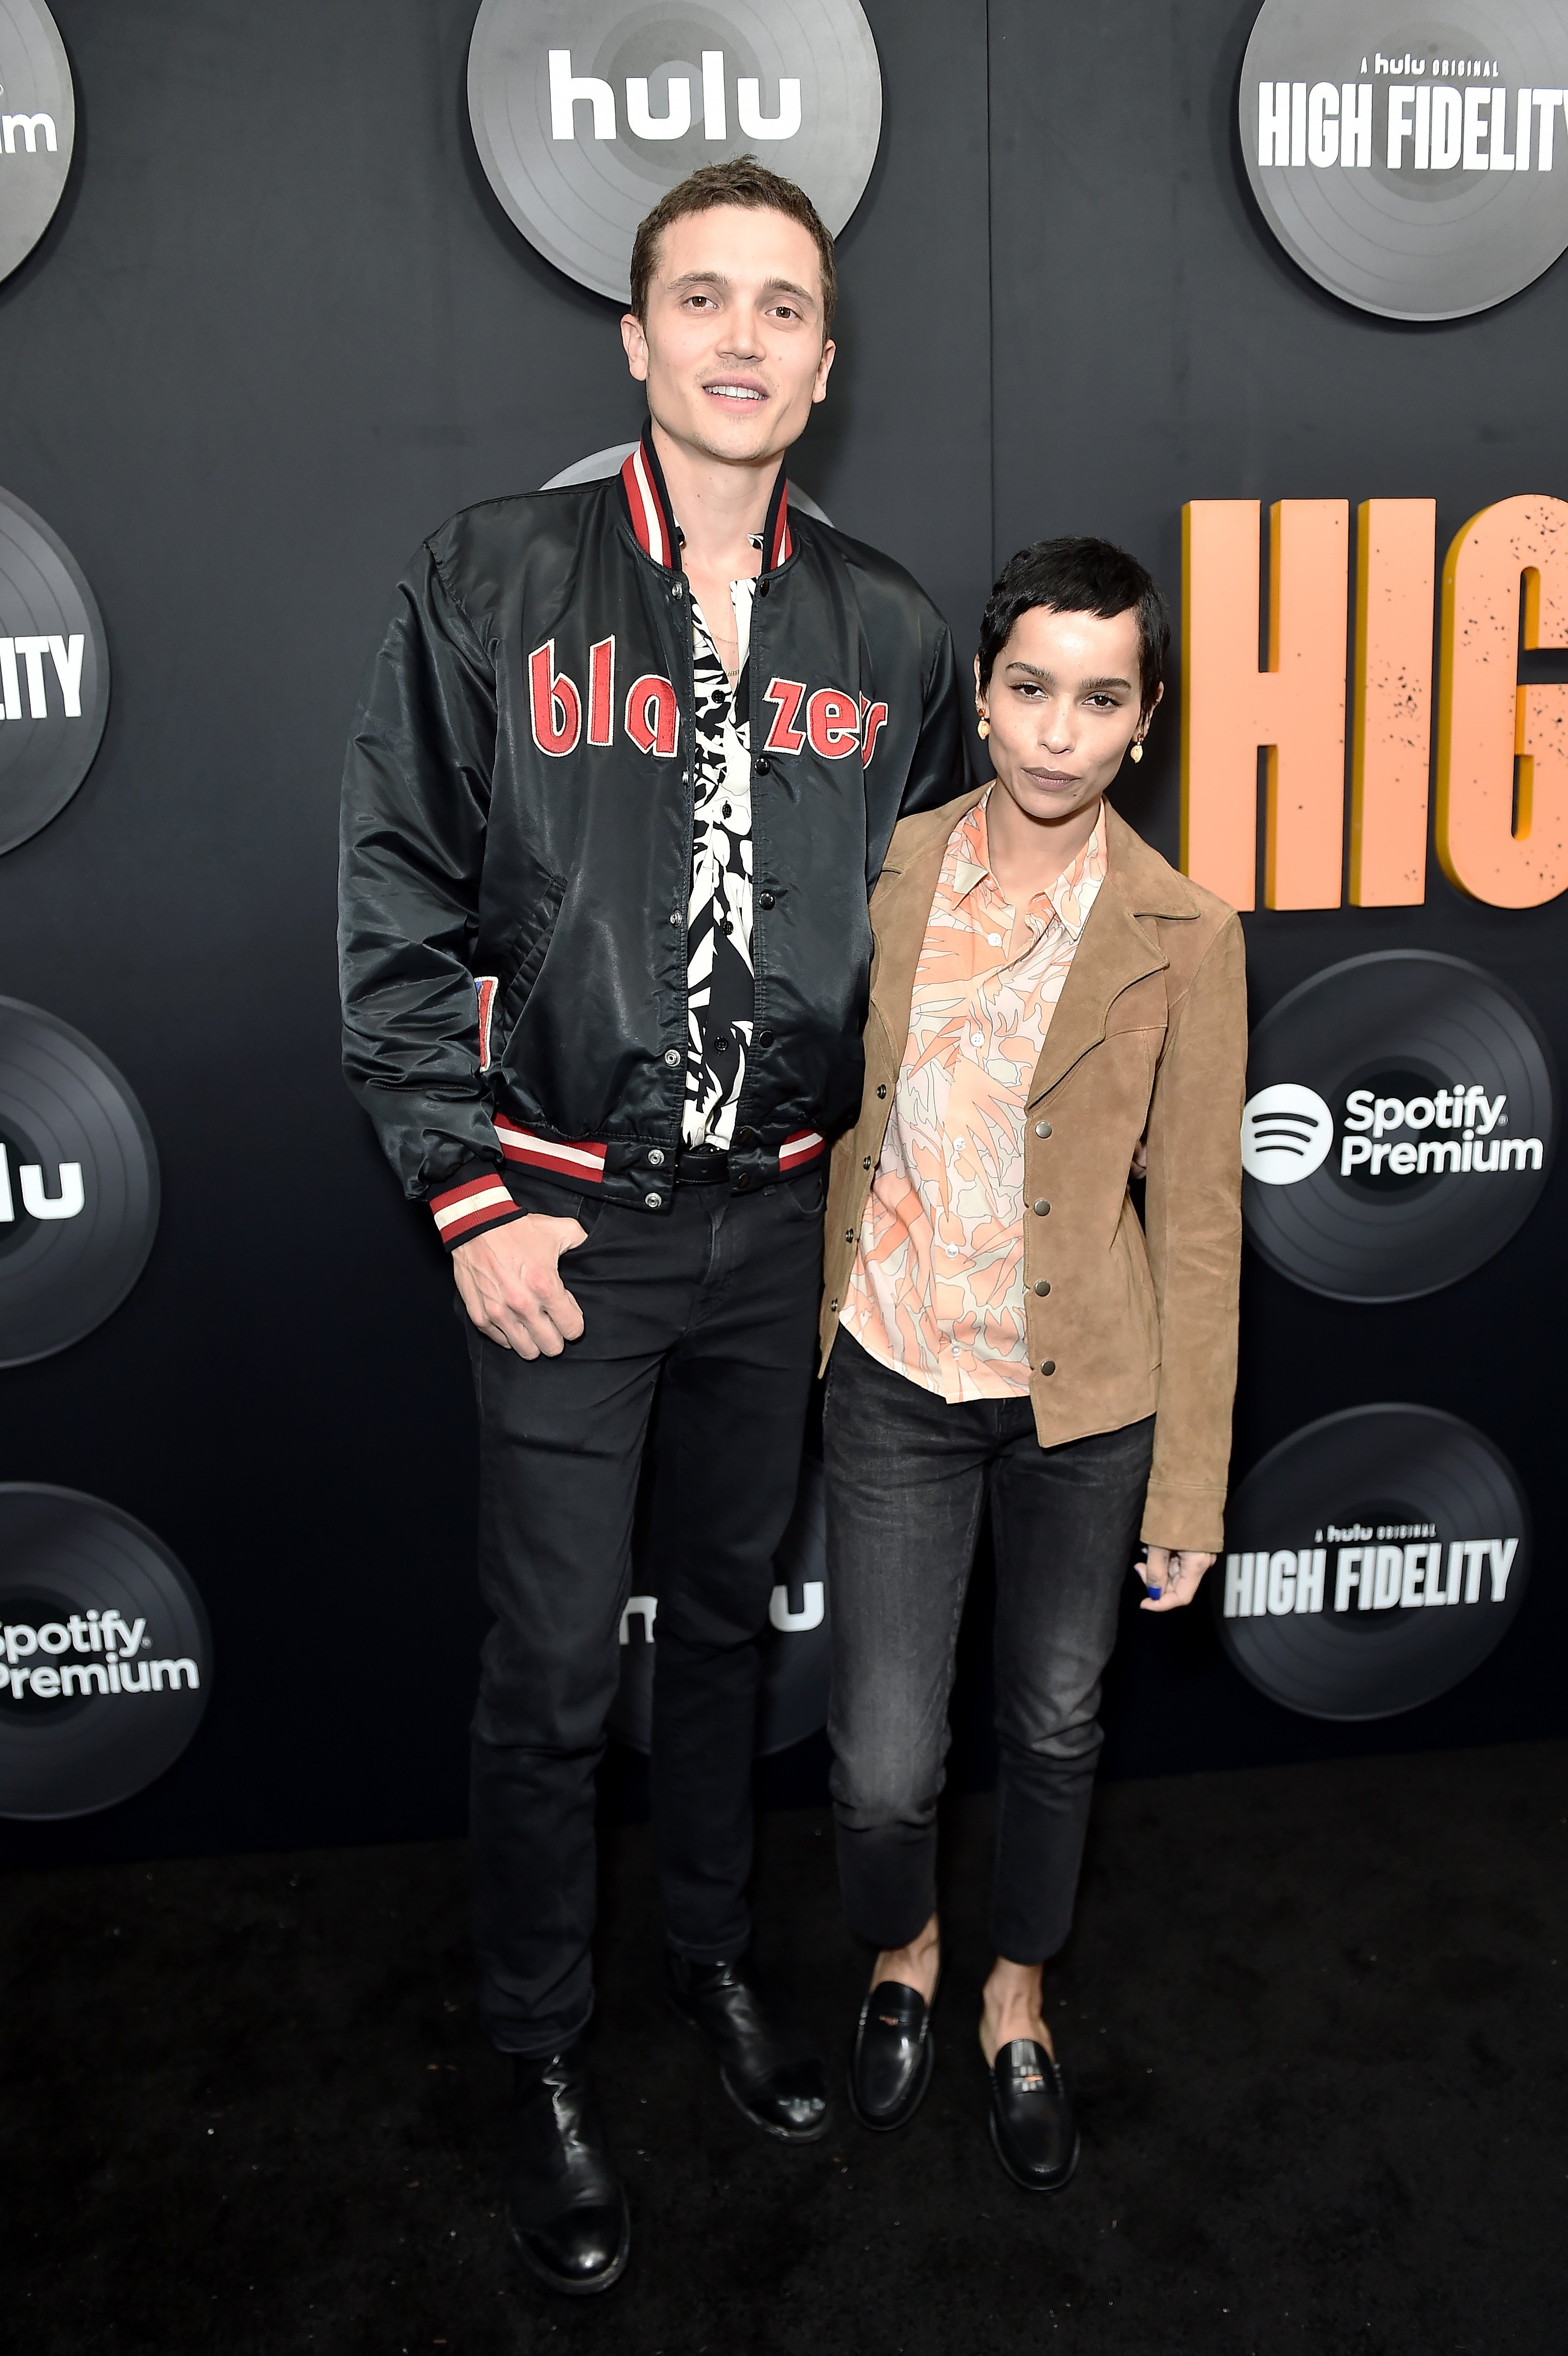 Karl Glusman and Zoe Kravitz attend Hulu's "High Fidelity" New York premiere at Metrograph on February 13, 2020 in New York City.  | Photo: Getty Images